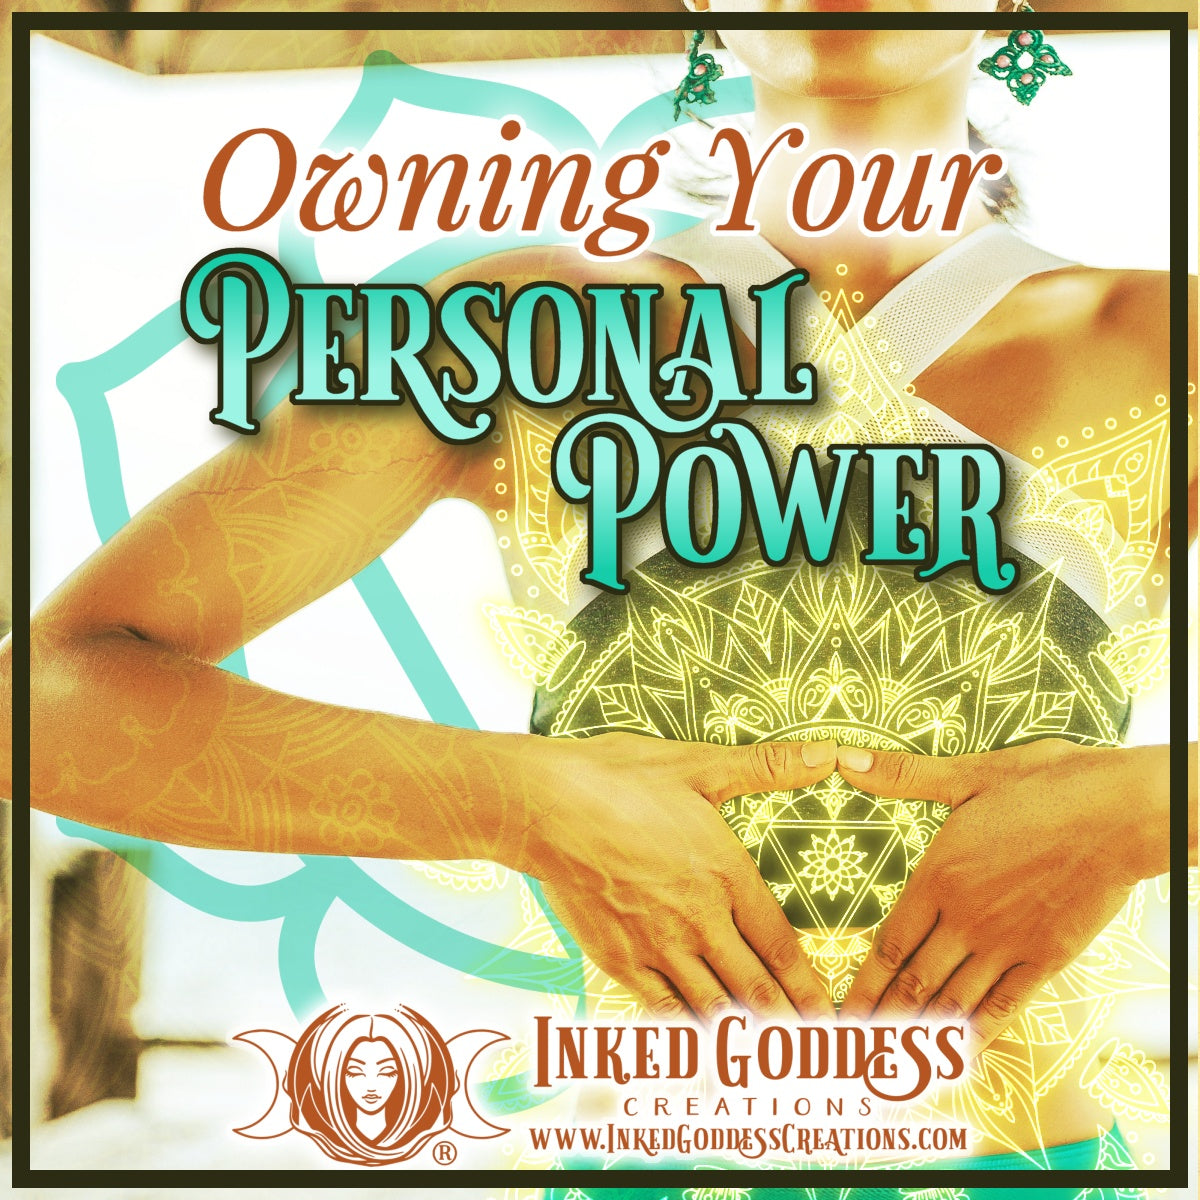 Owning Your Personal Power